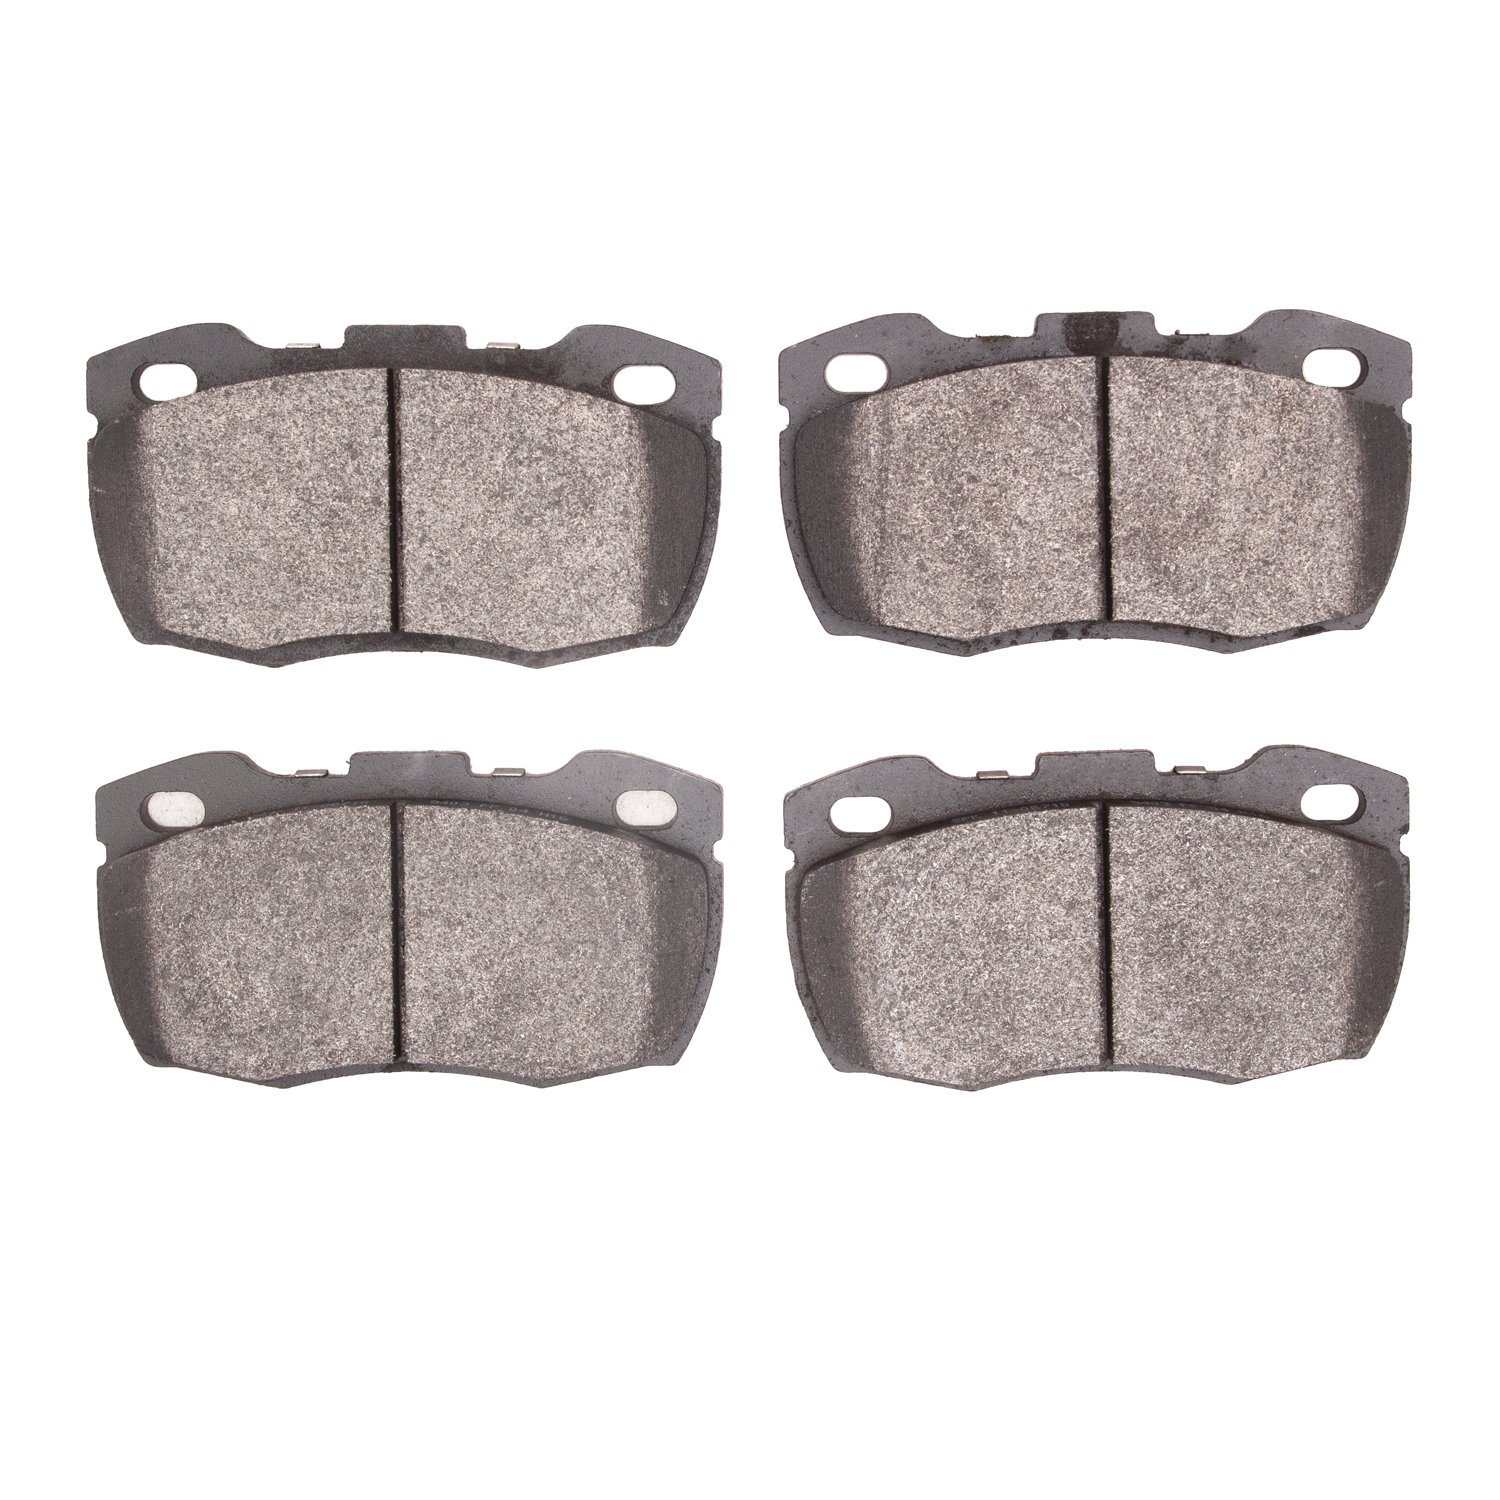 1551-0671-00 5000 Advanced Low-Metallic Brake Pads, 1993-2016 Land Rover, Position: Front